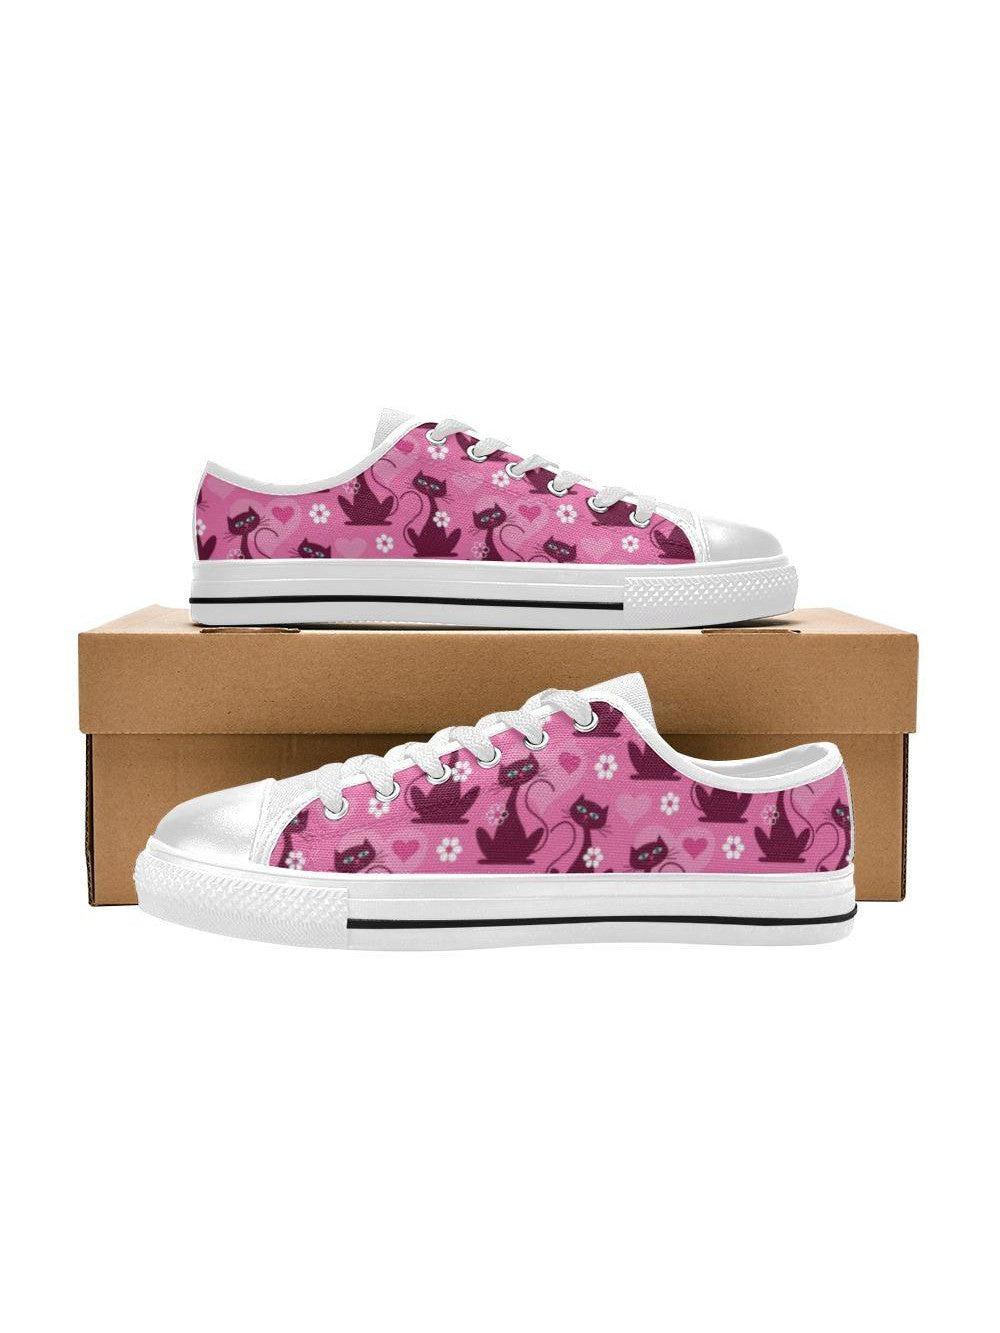 LOVECATS WHITE Retro Style Sneakers